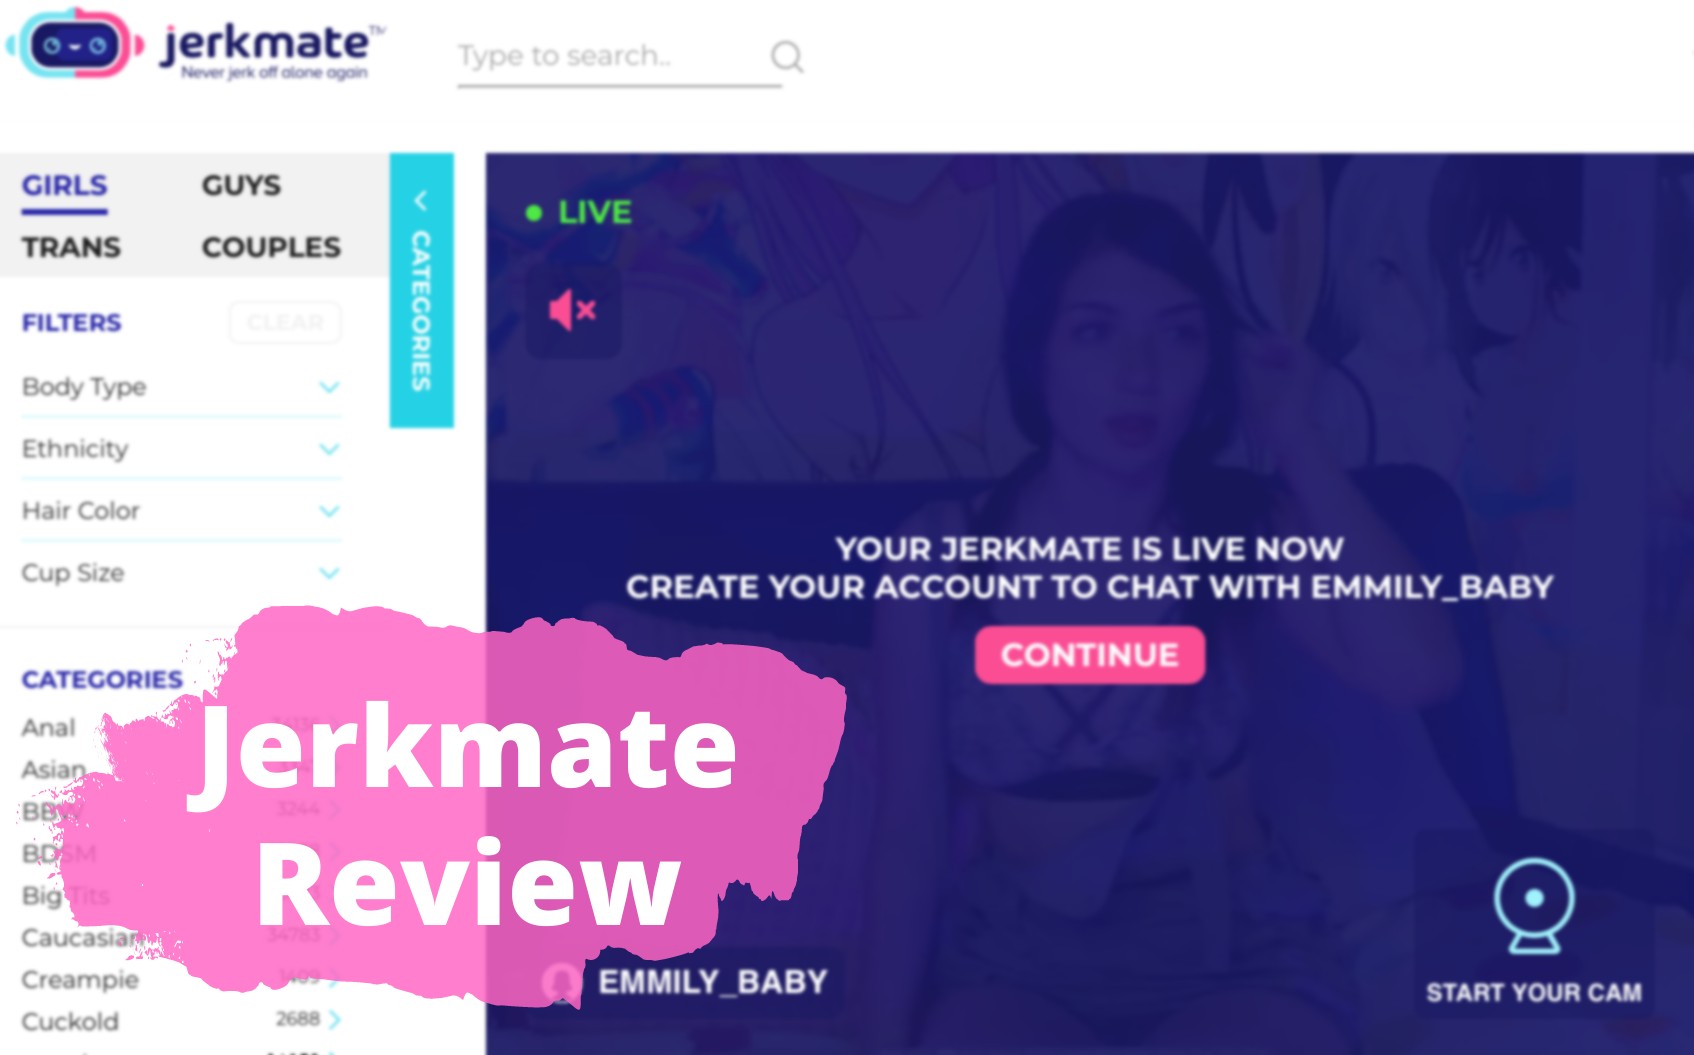 Jerkmate Review Is Their Membership Worth Using? My experience with the uber popular cam site, Jerkmate photo